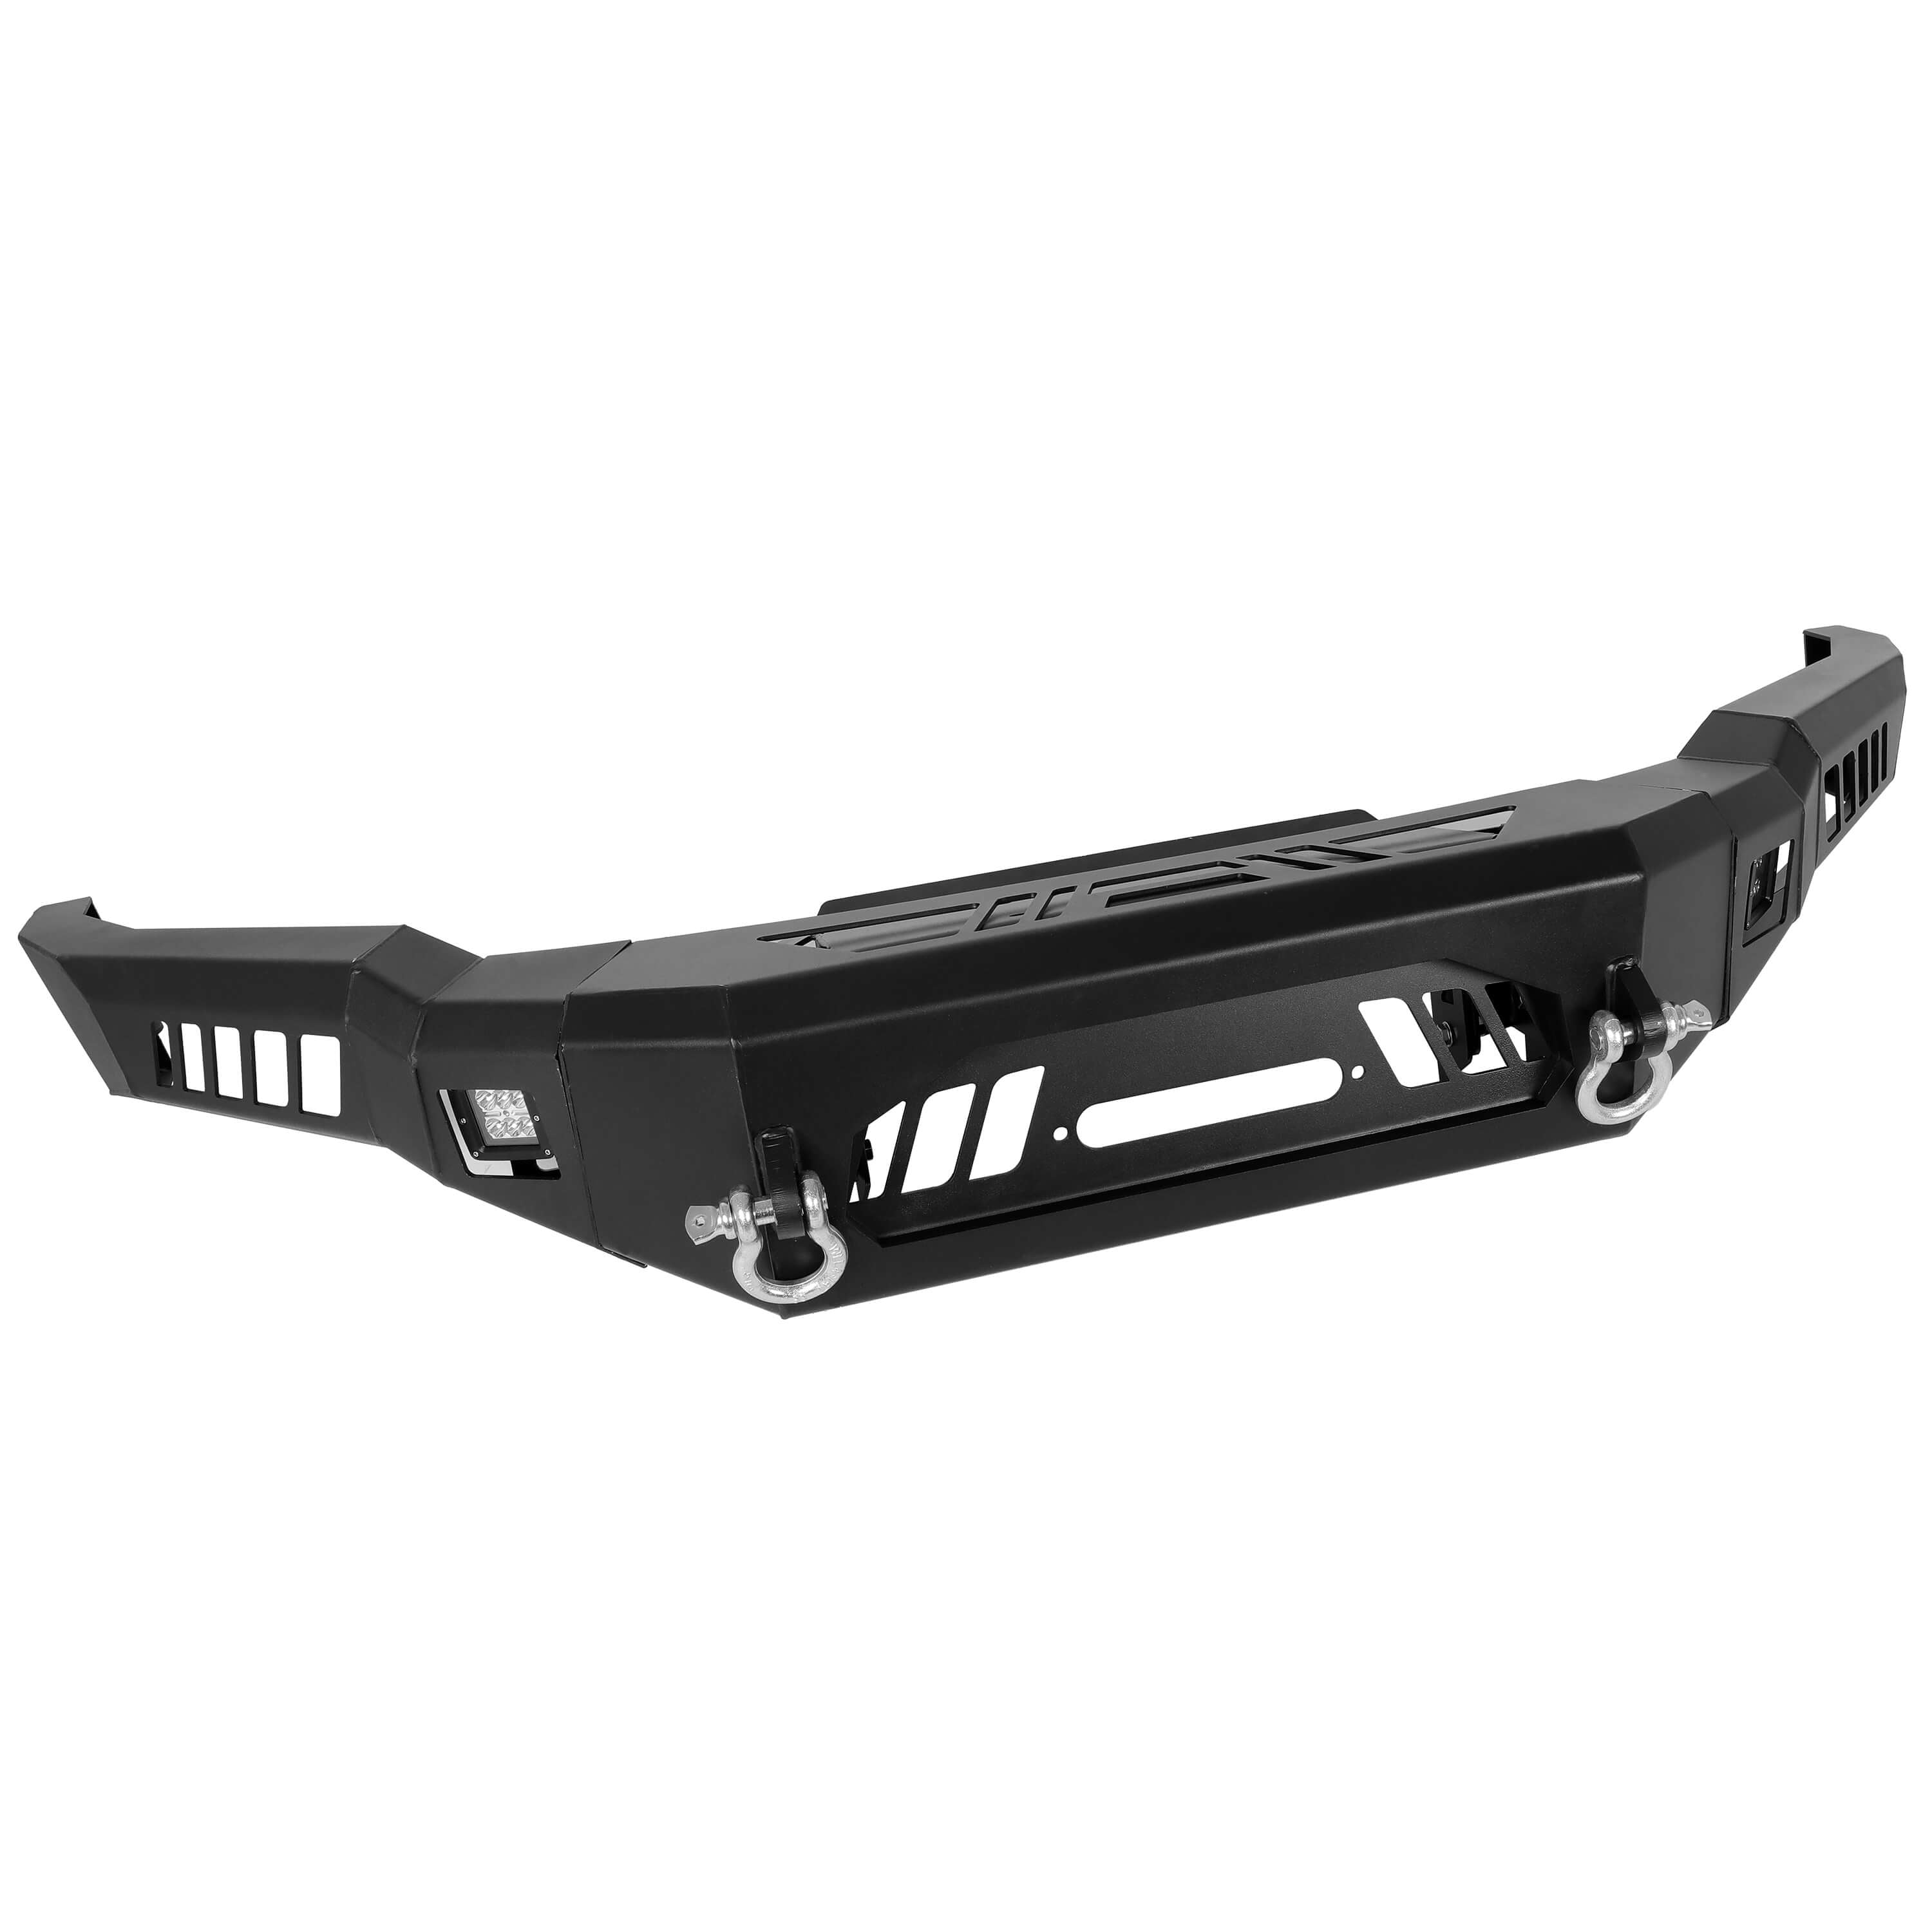 MR.GOP-Modular Front Bumper for 2018-2020 Ford F-150,3-Piece